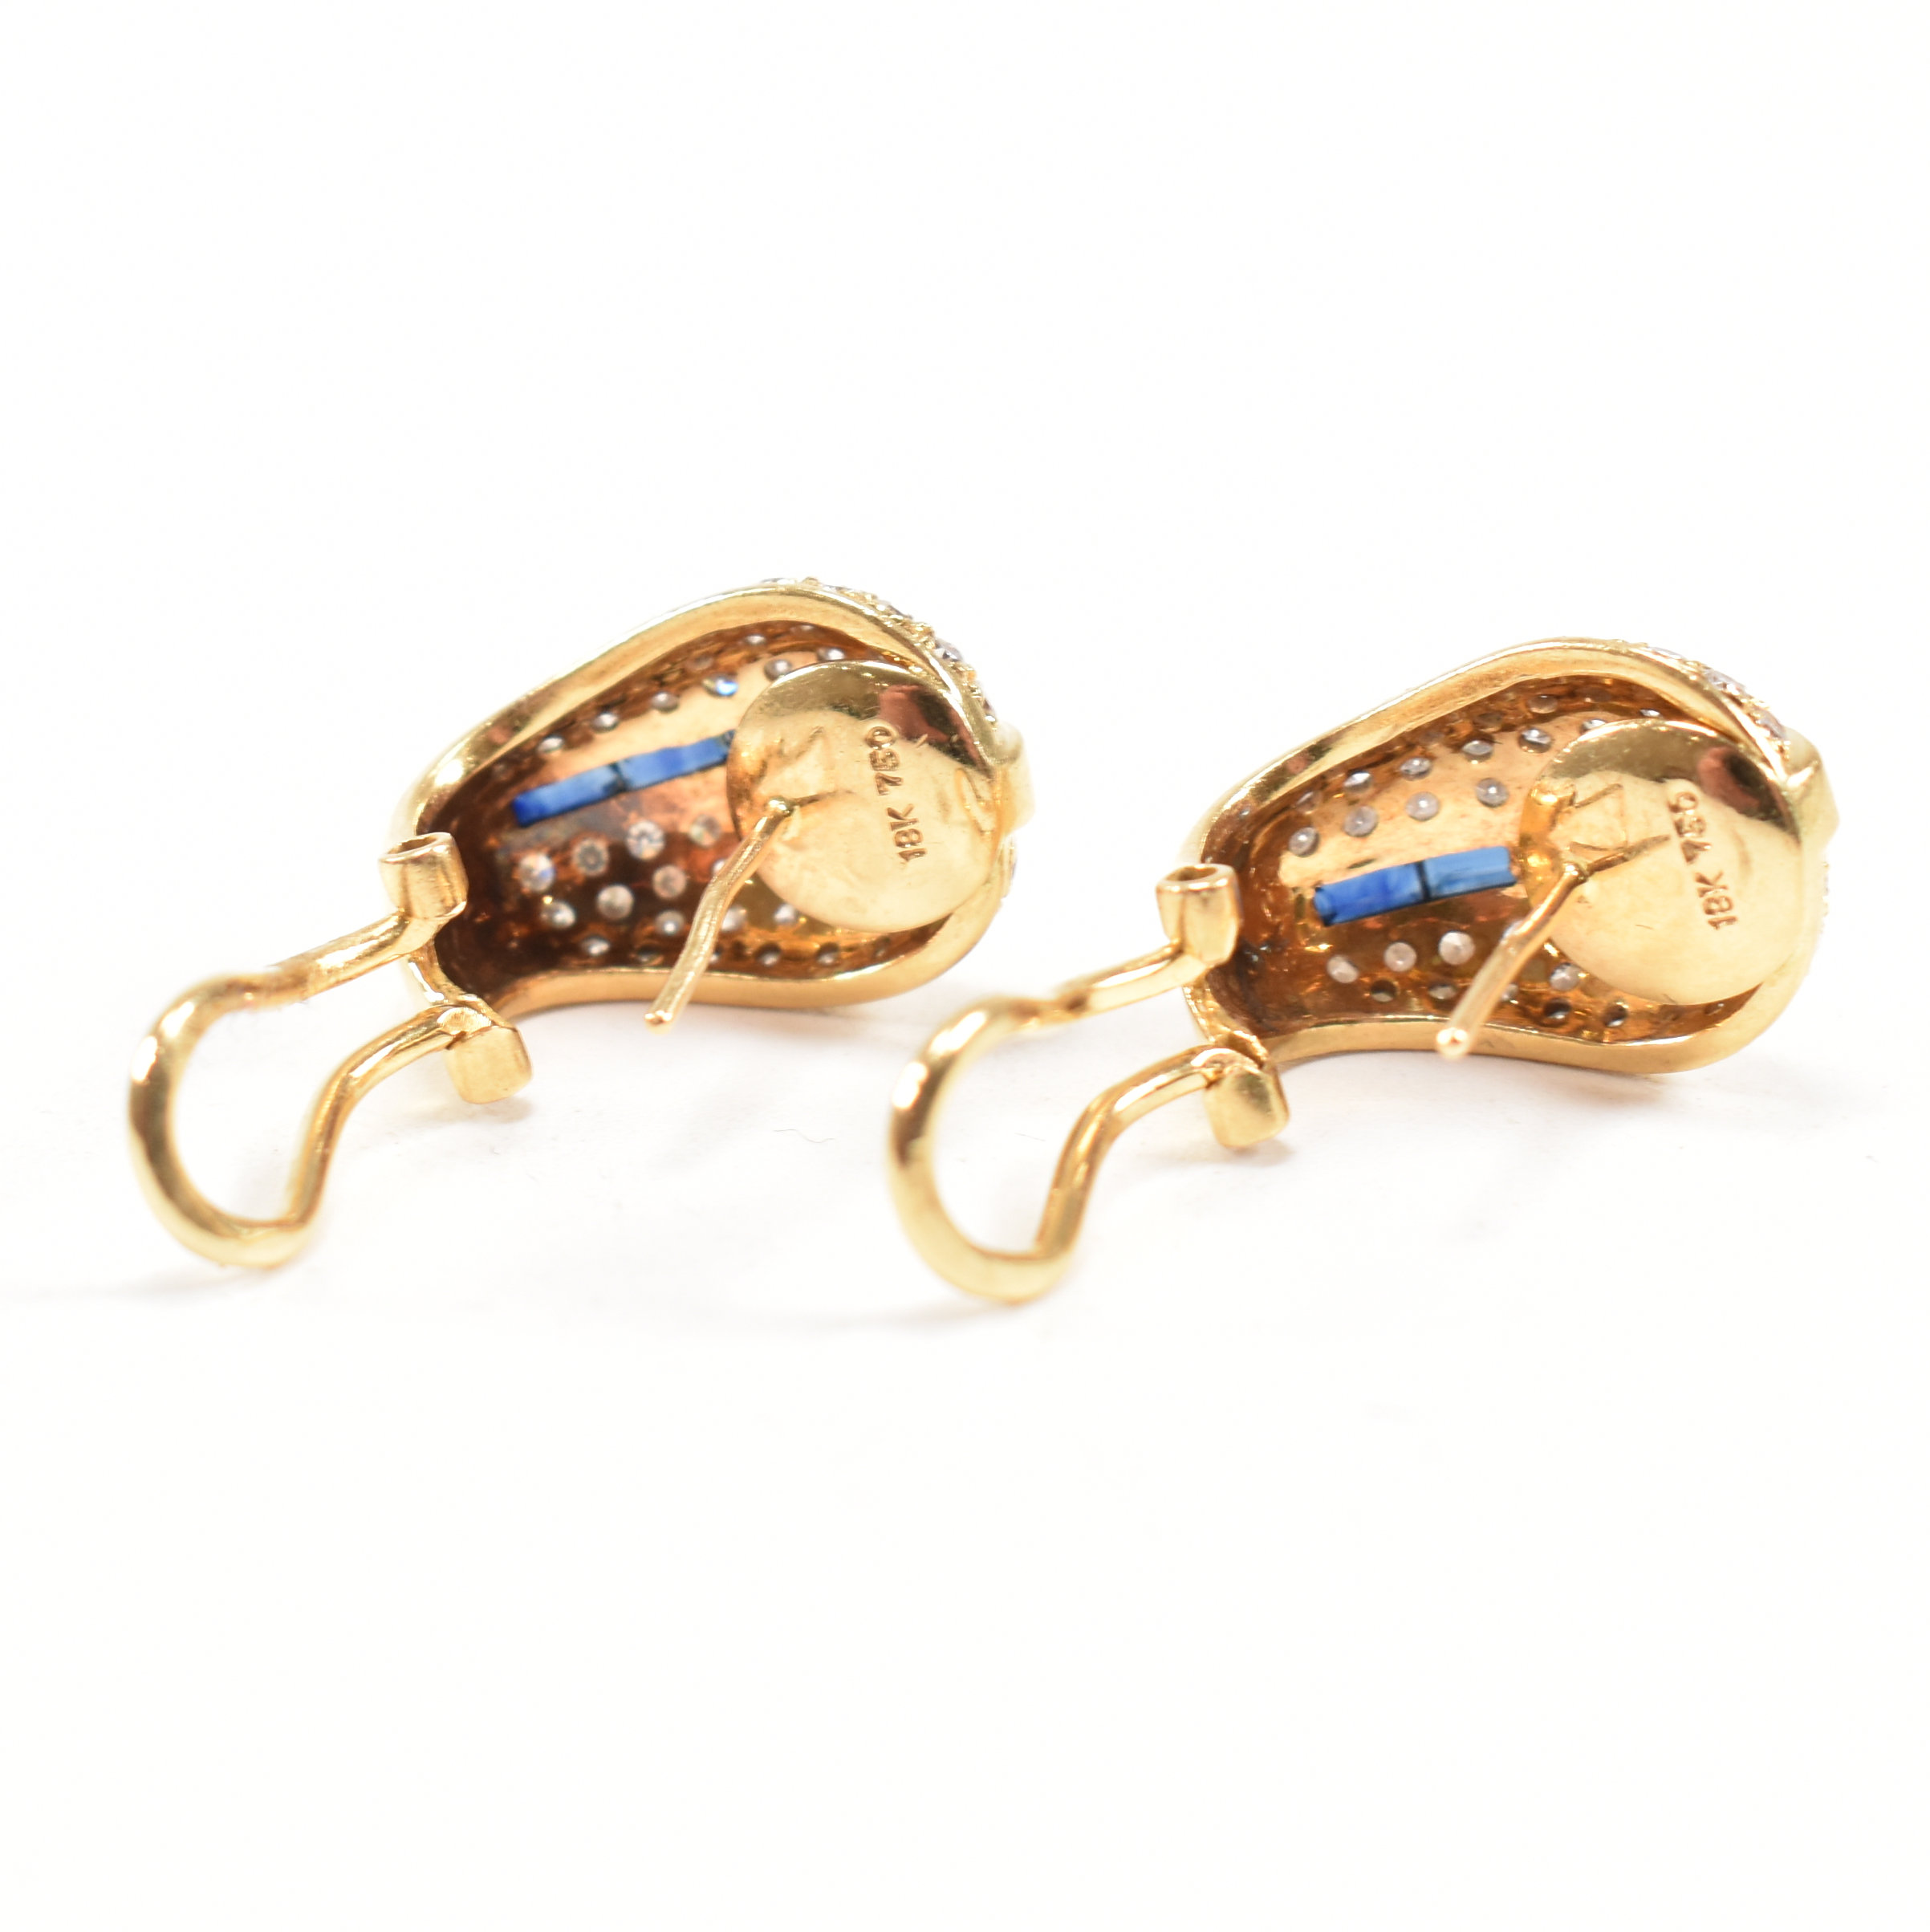 PAIR OF 18CT GOLD ART DECO STYLE SAPPHIRE & DIAMOND EARRINGS - Image 4 of 8